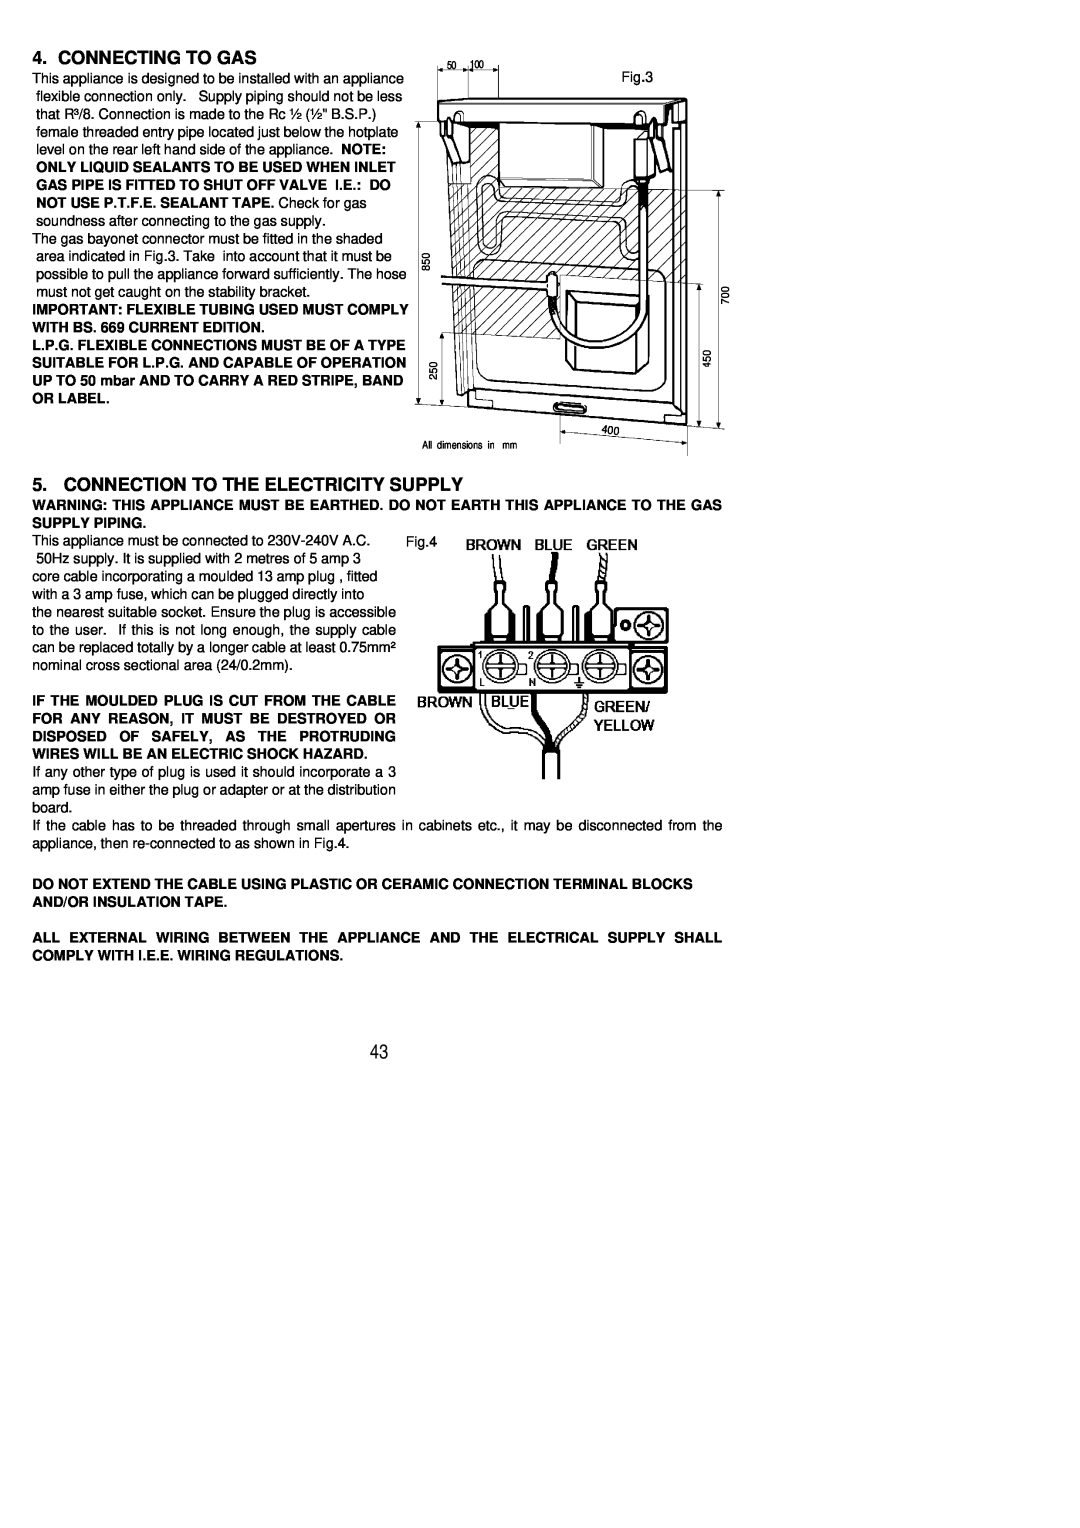 Electrolux SIG 501 installation instructions Connecting To Gas, Connection To The Electricity Supply 